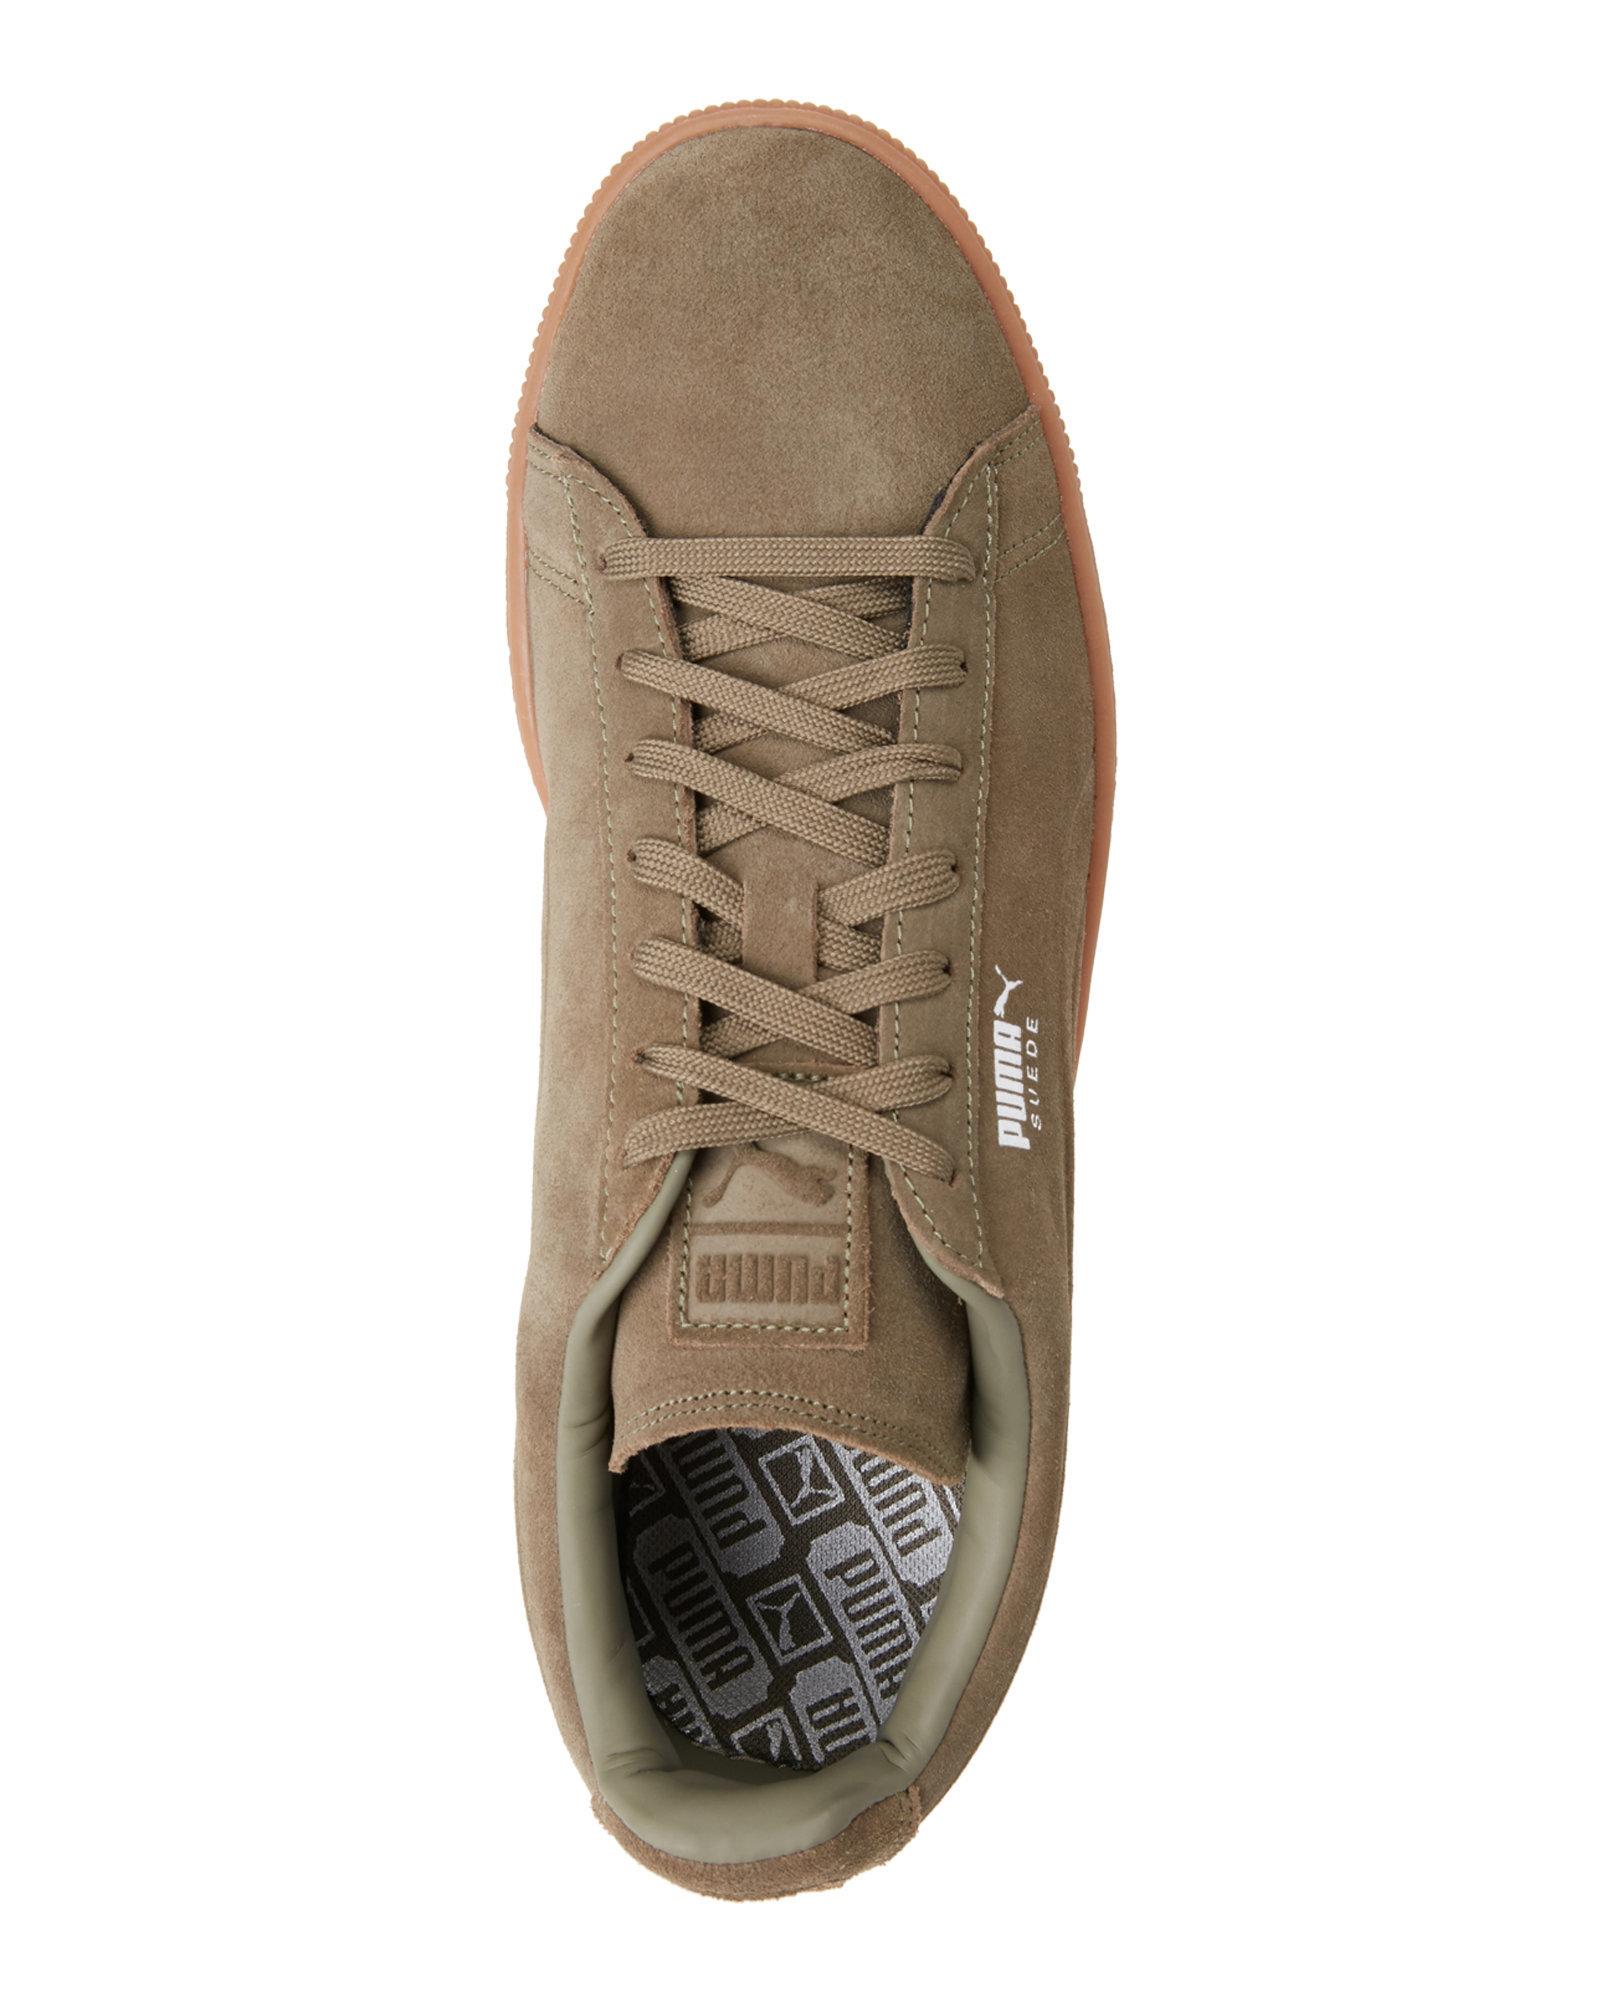  www lyst com shoes puma burnt olive suede embossed low top sneakers burnt olive 